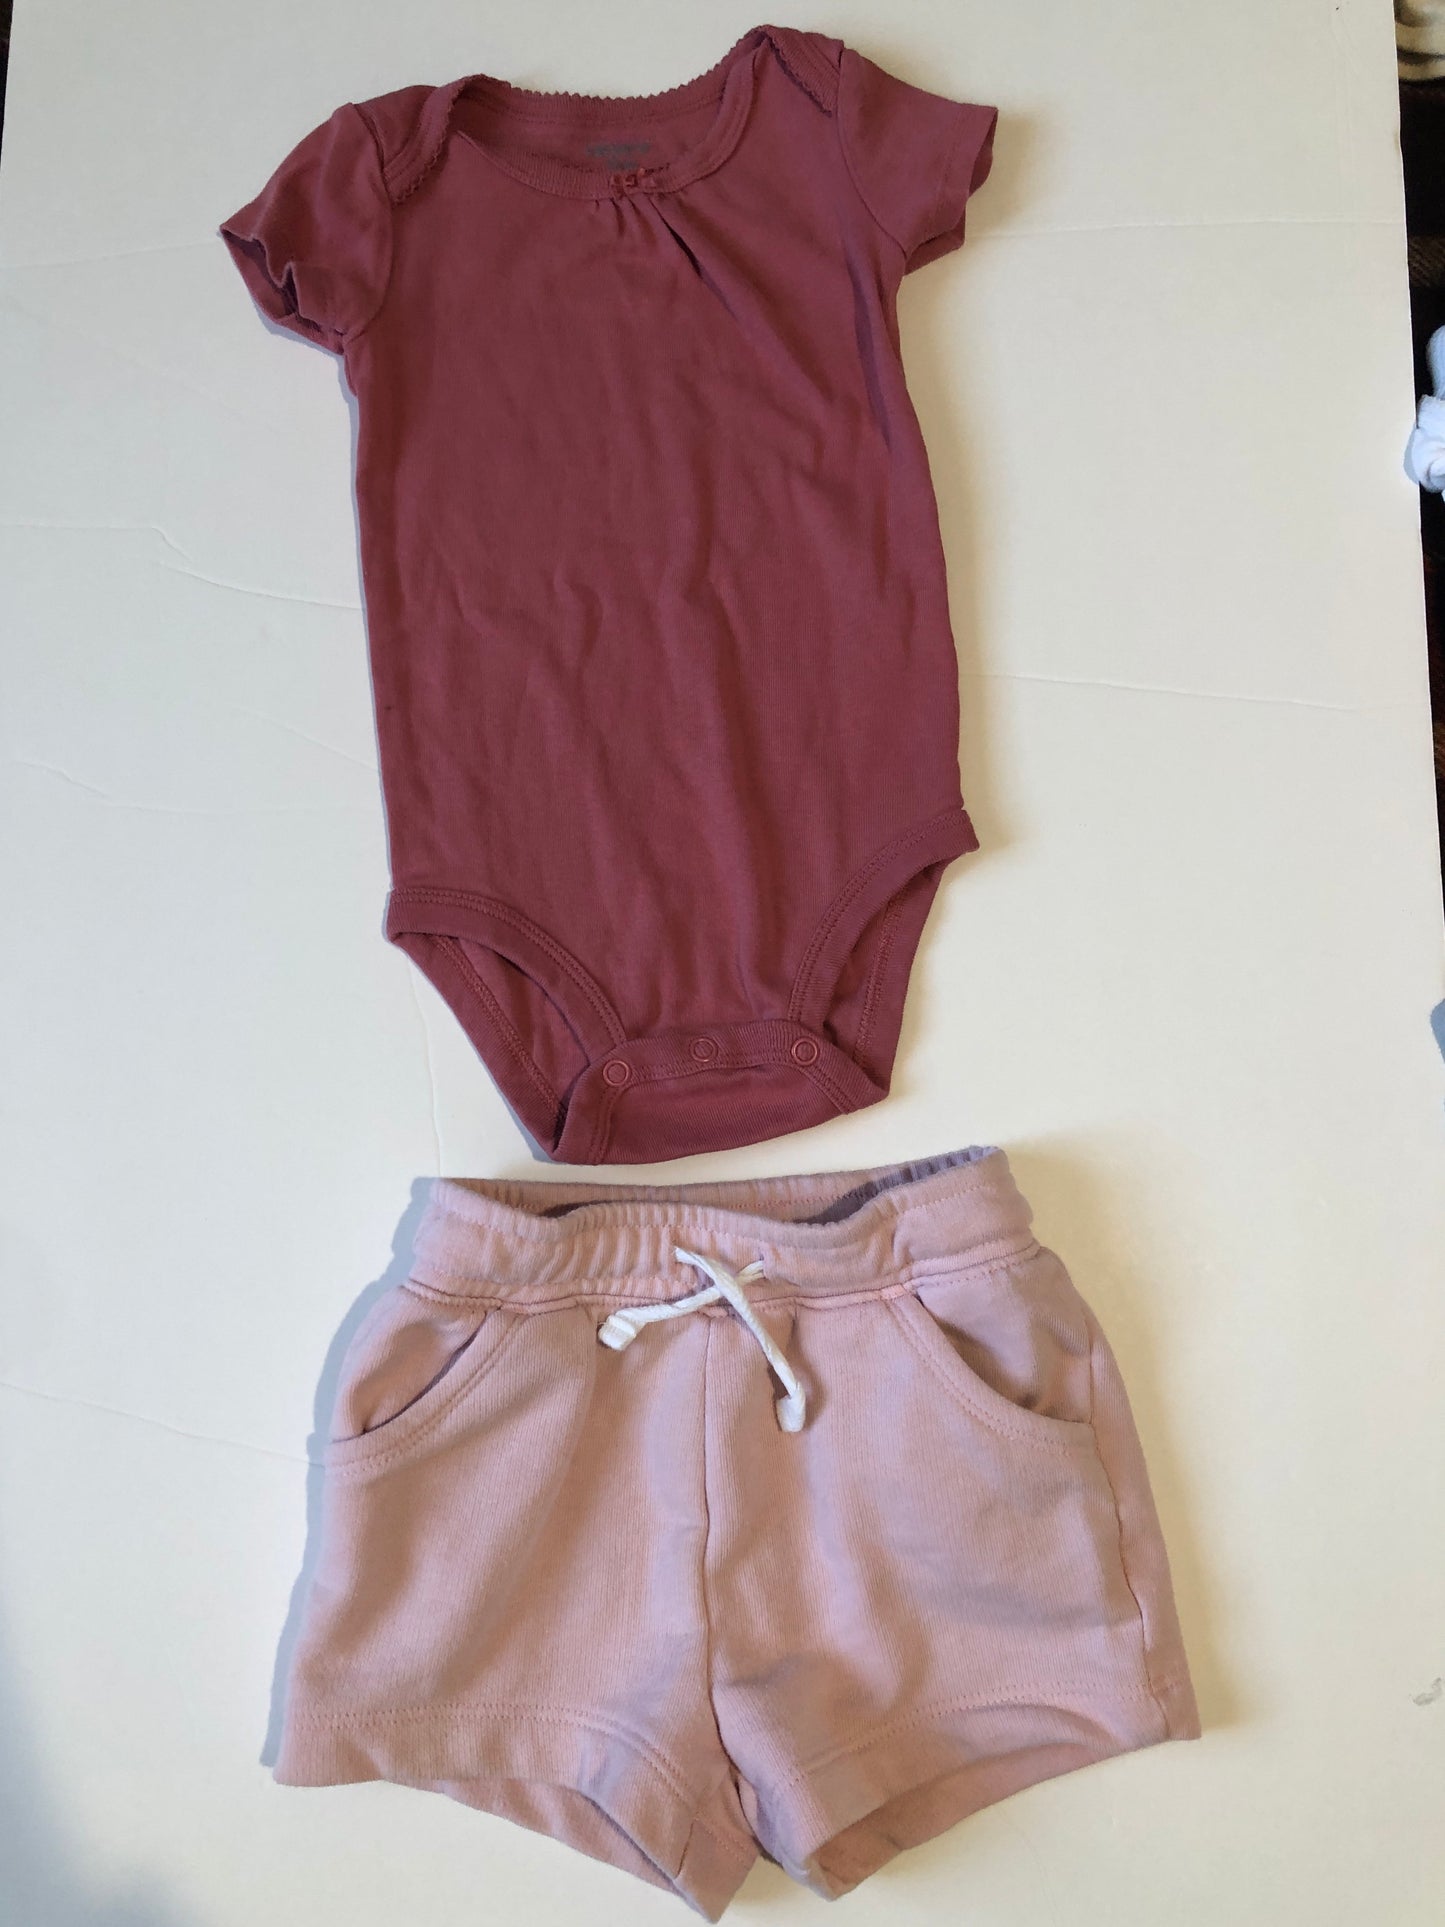 12 month girl summer short and shirt outfit